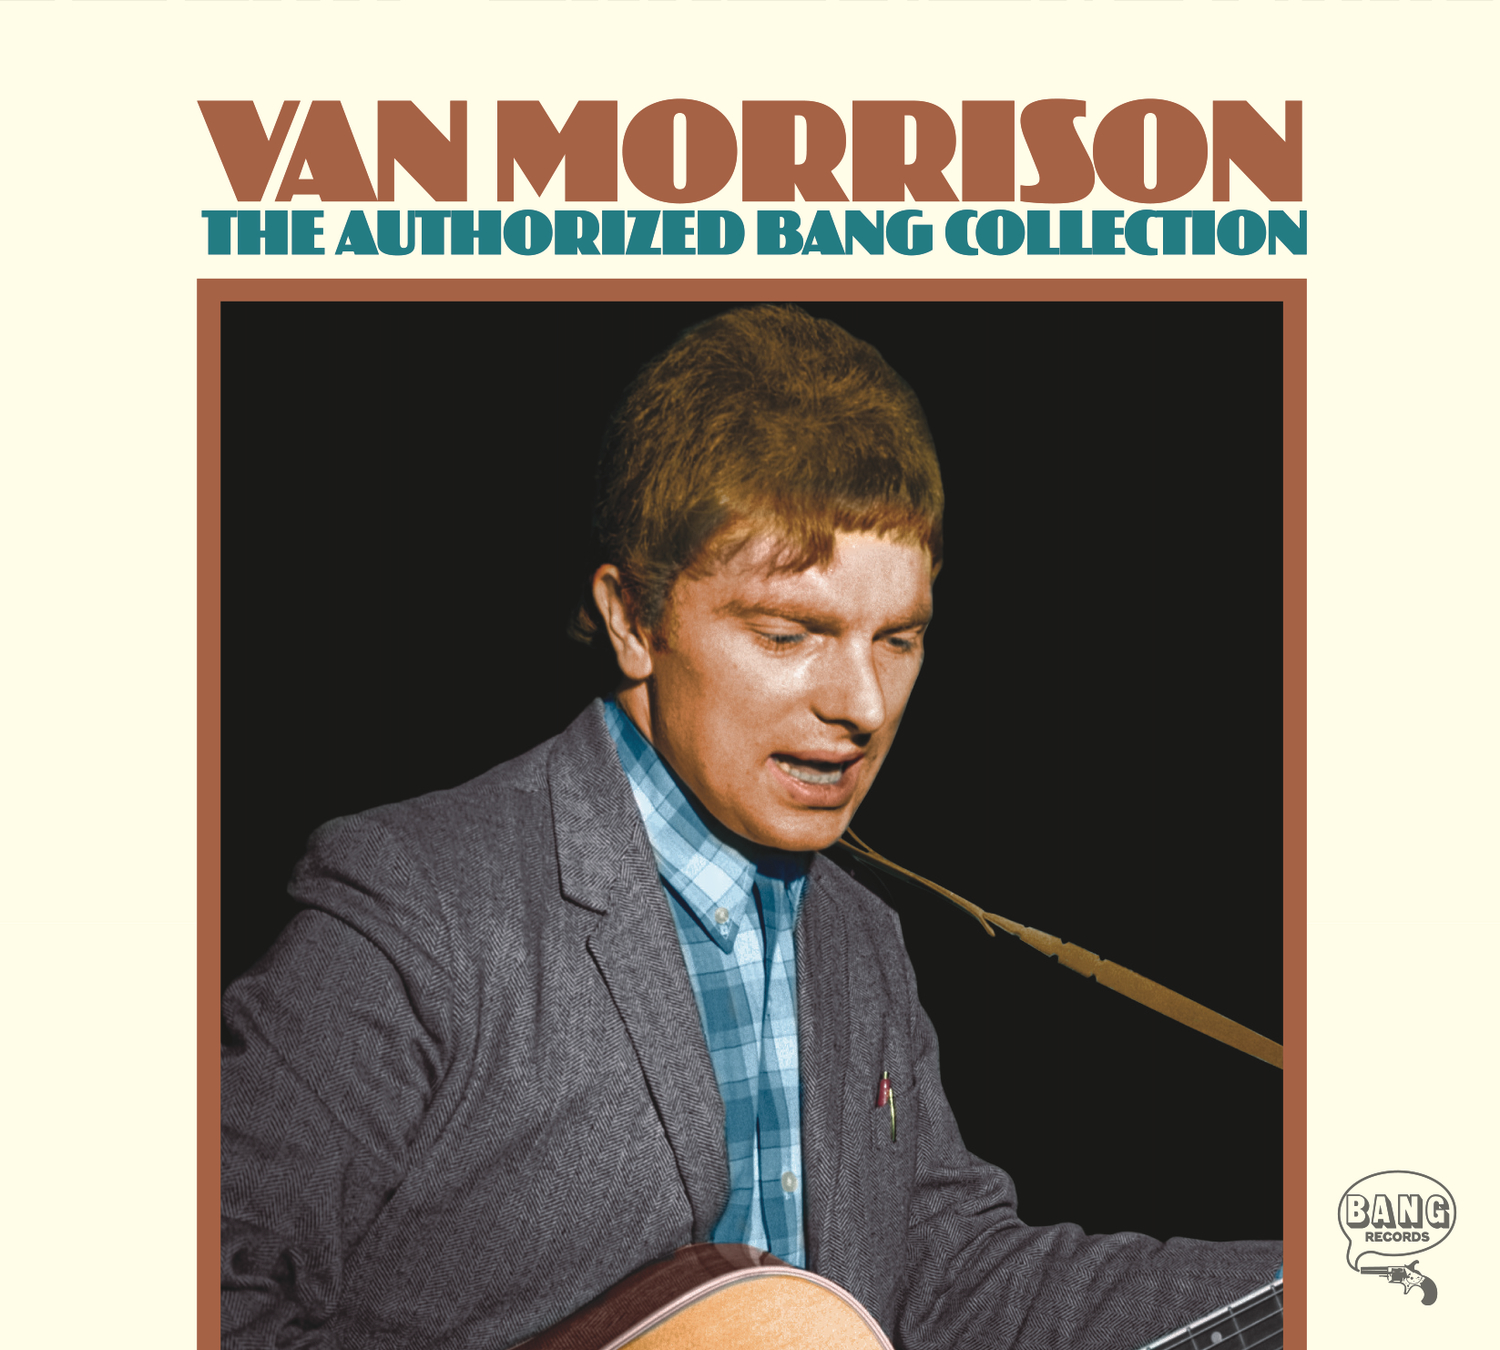 The Authorized Bang Collection